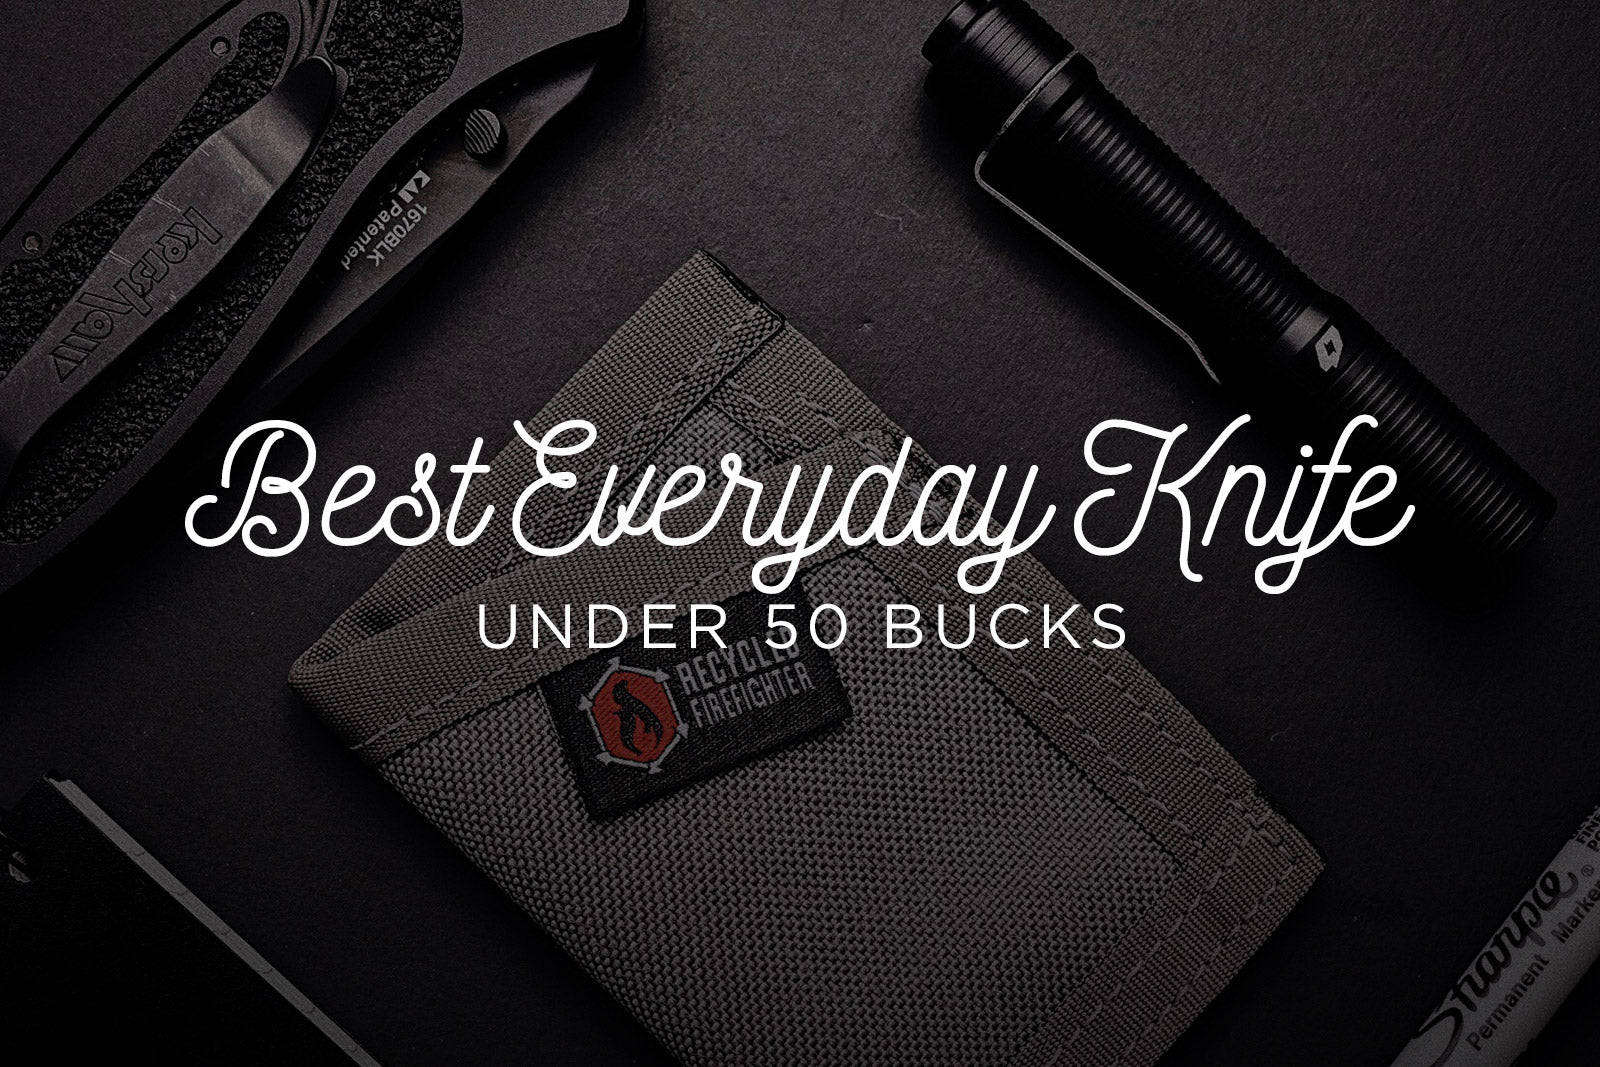 Best Everyday Carry Knife under 50